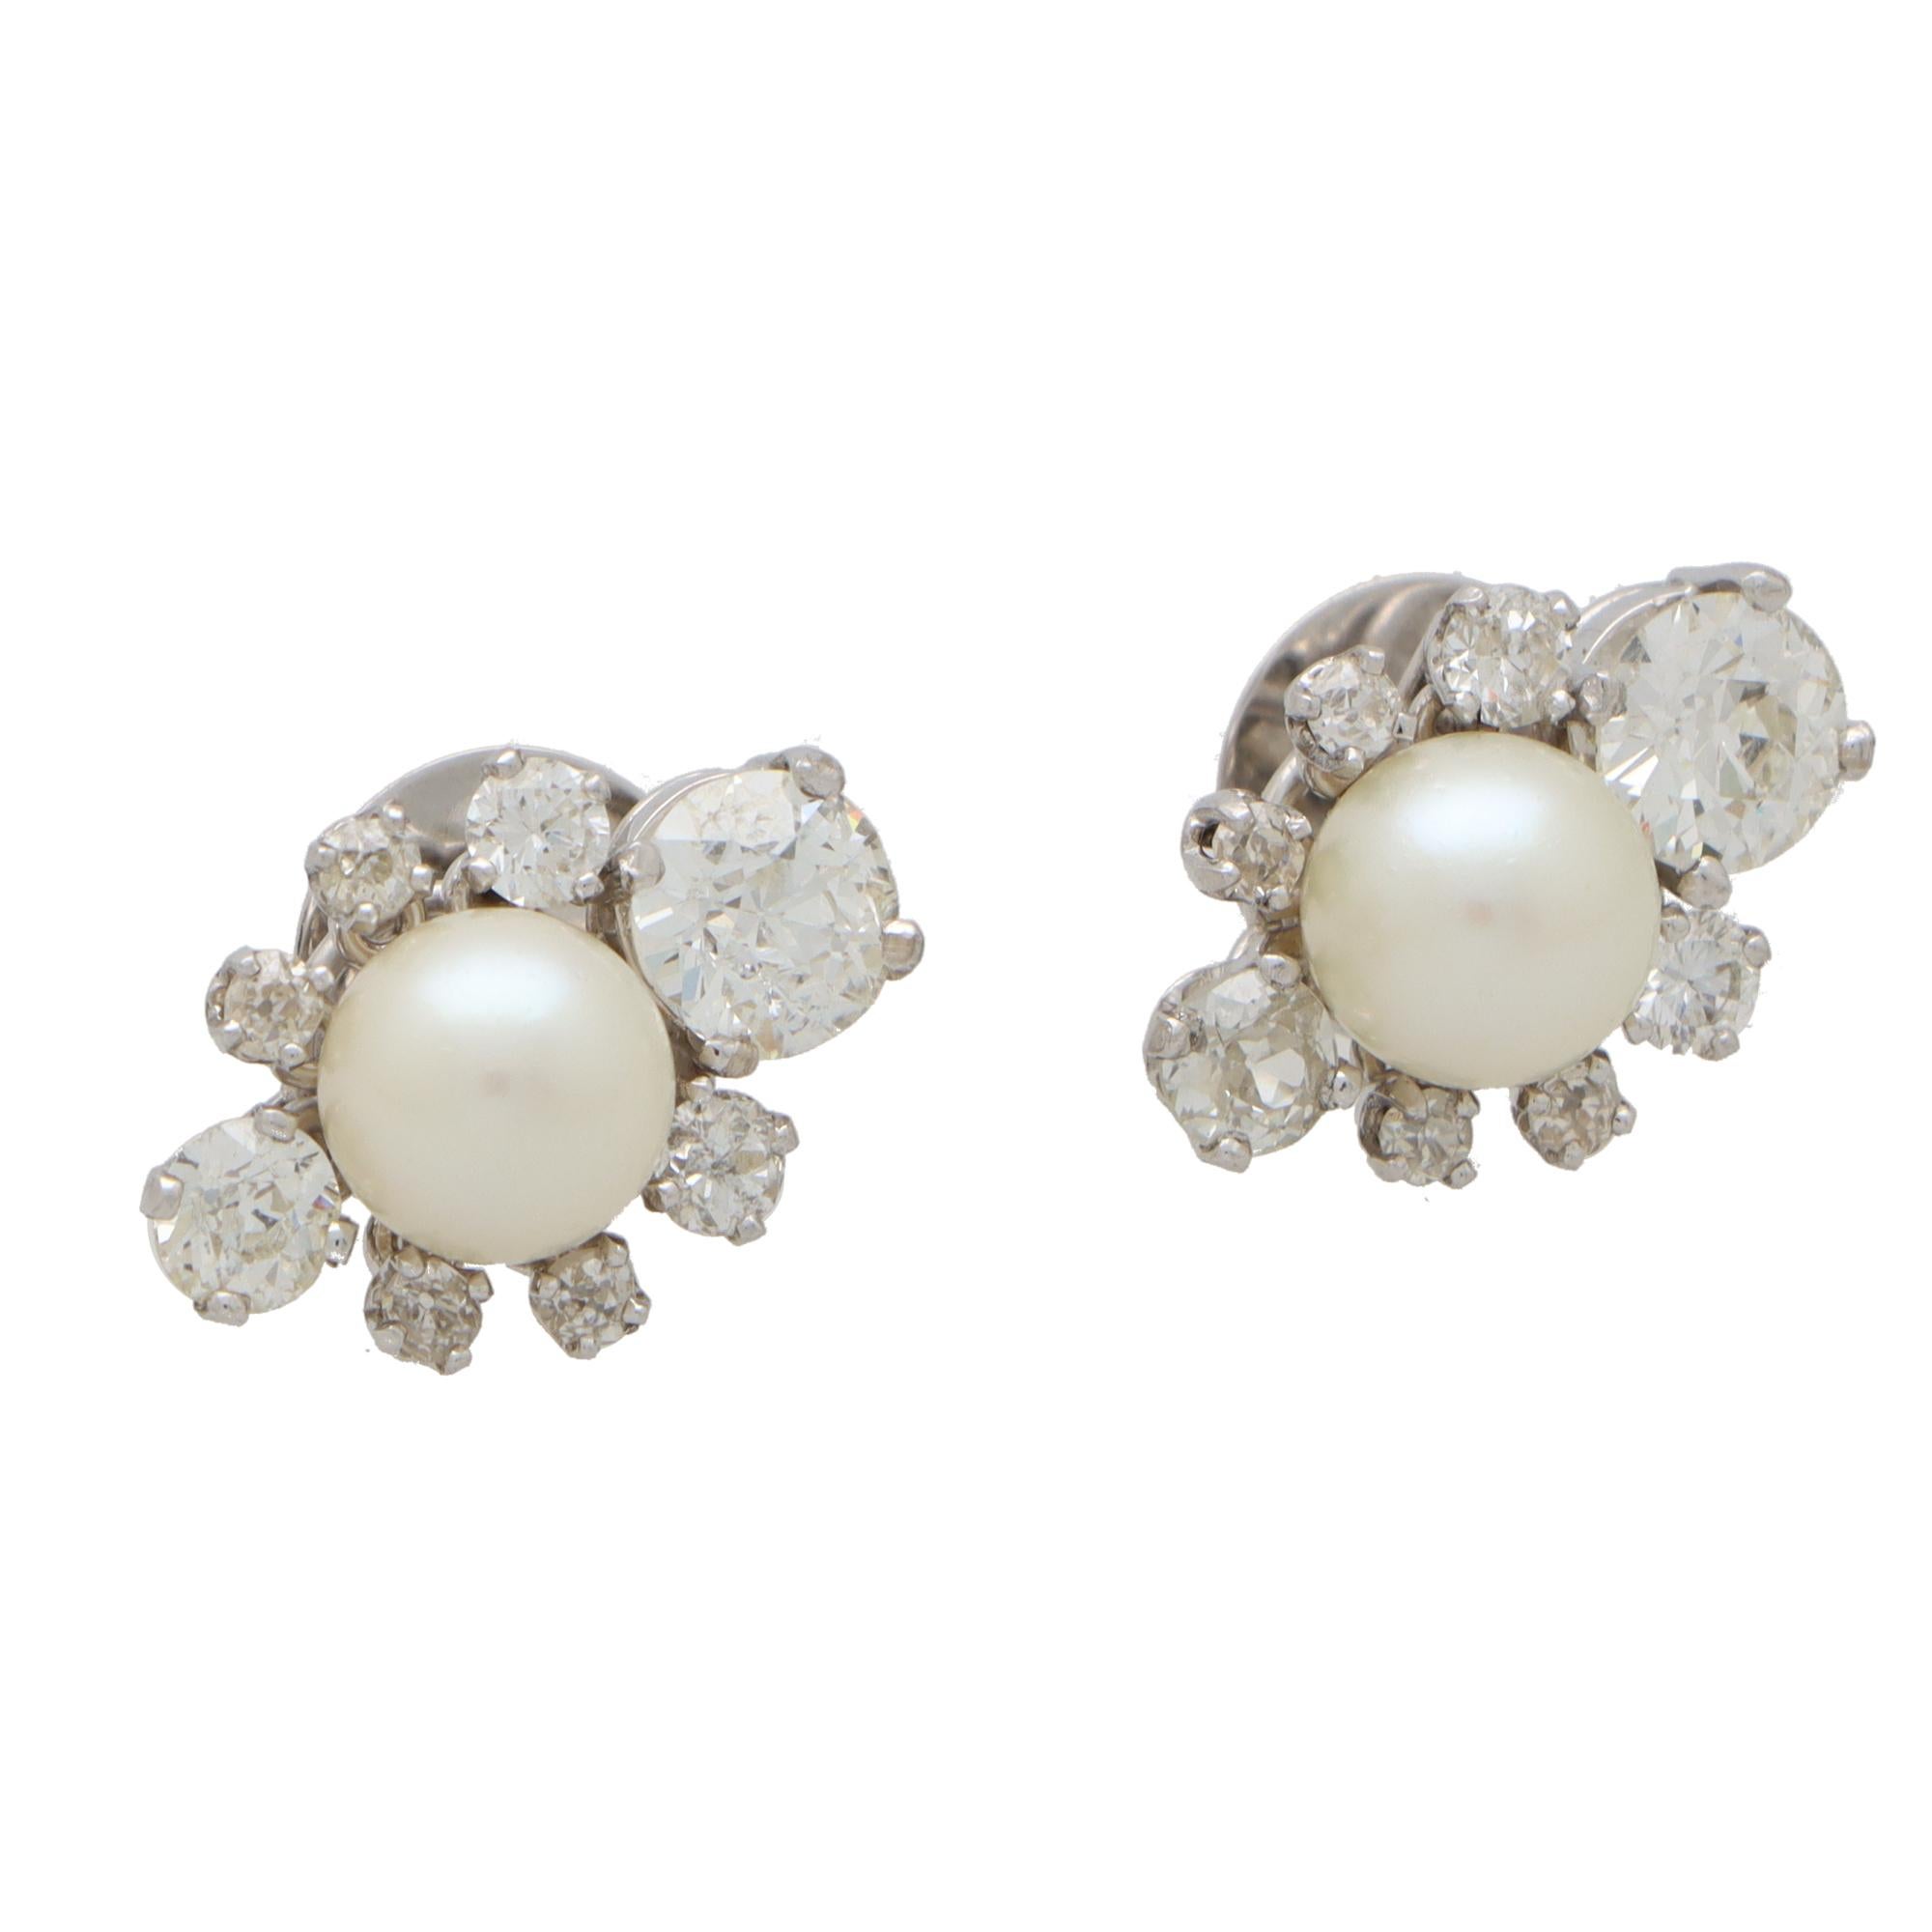 Art Deco Inspired Pearl and Old Cut Diamond Earrings Set in 18k White Gold In Excellent Condition For Sale In London, GB